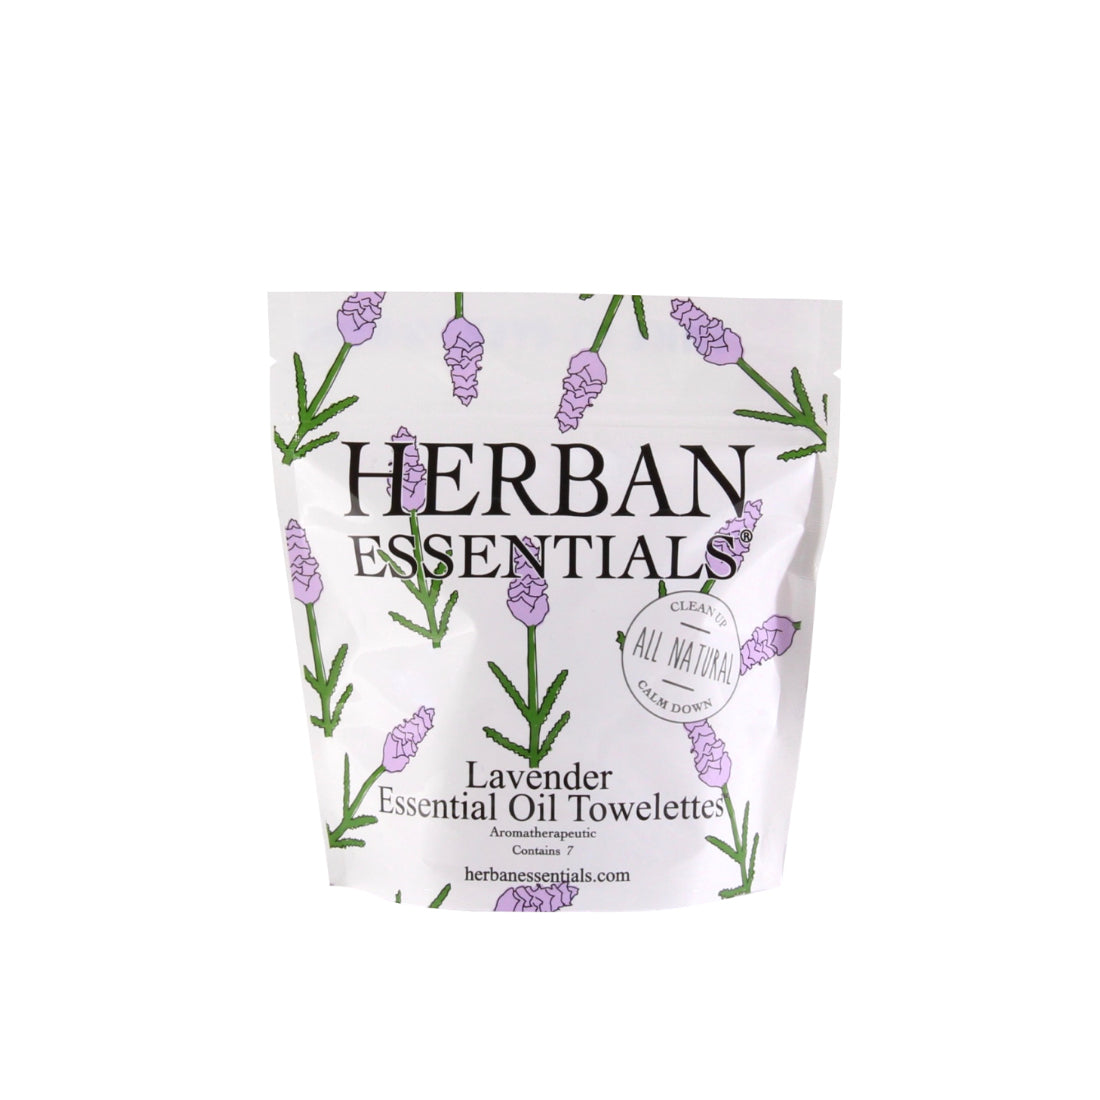 A package of Herban Essentials Lavender Essential Oil Towelettes - Lavender Mini-Bags. The bag is white with purple and green floral graphics and text detailing the product's natural ingredients, perfect for clean hands on-the-go.